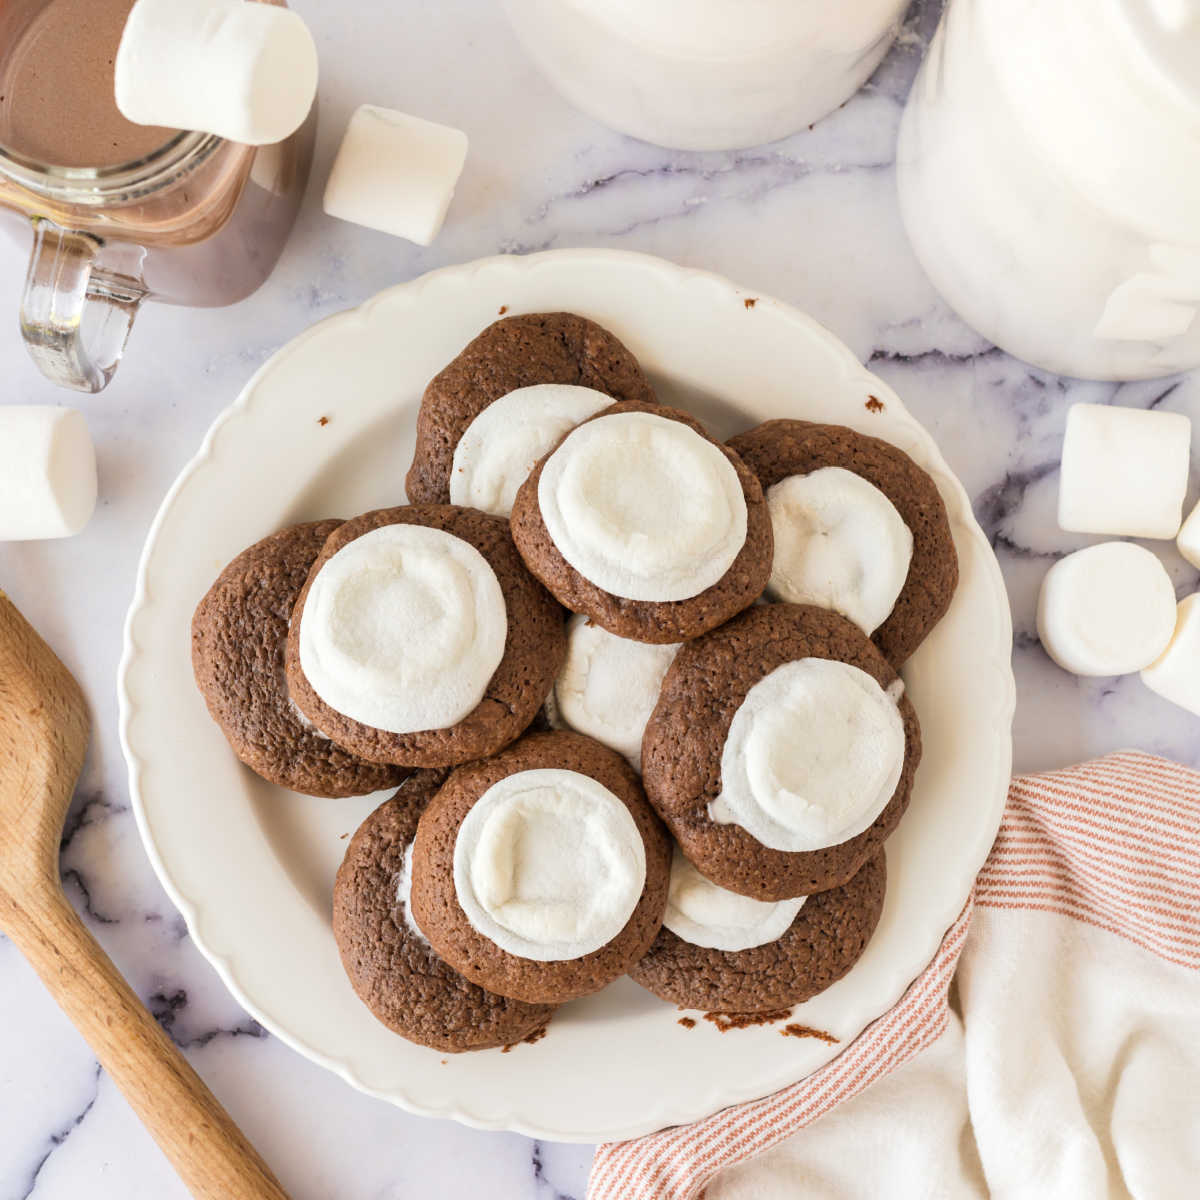 Plate of hot chocolate cookies with melted marshmallows baked onto the top of a soft chocolate cookie.